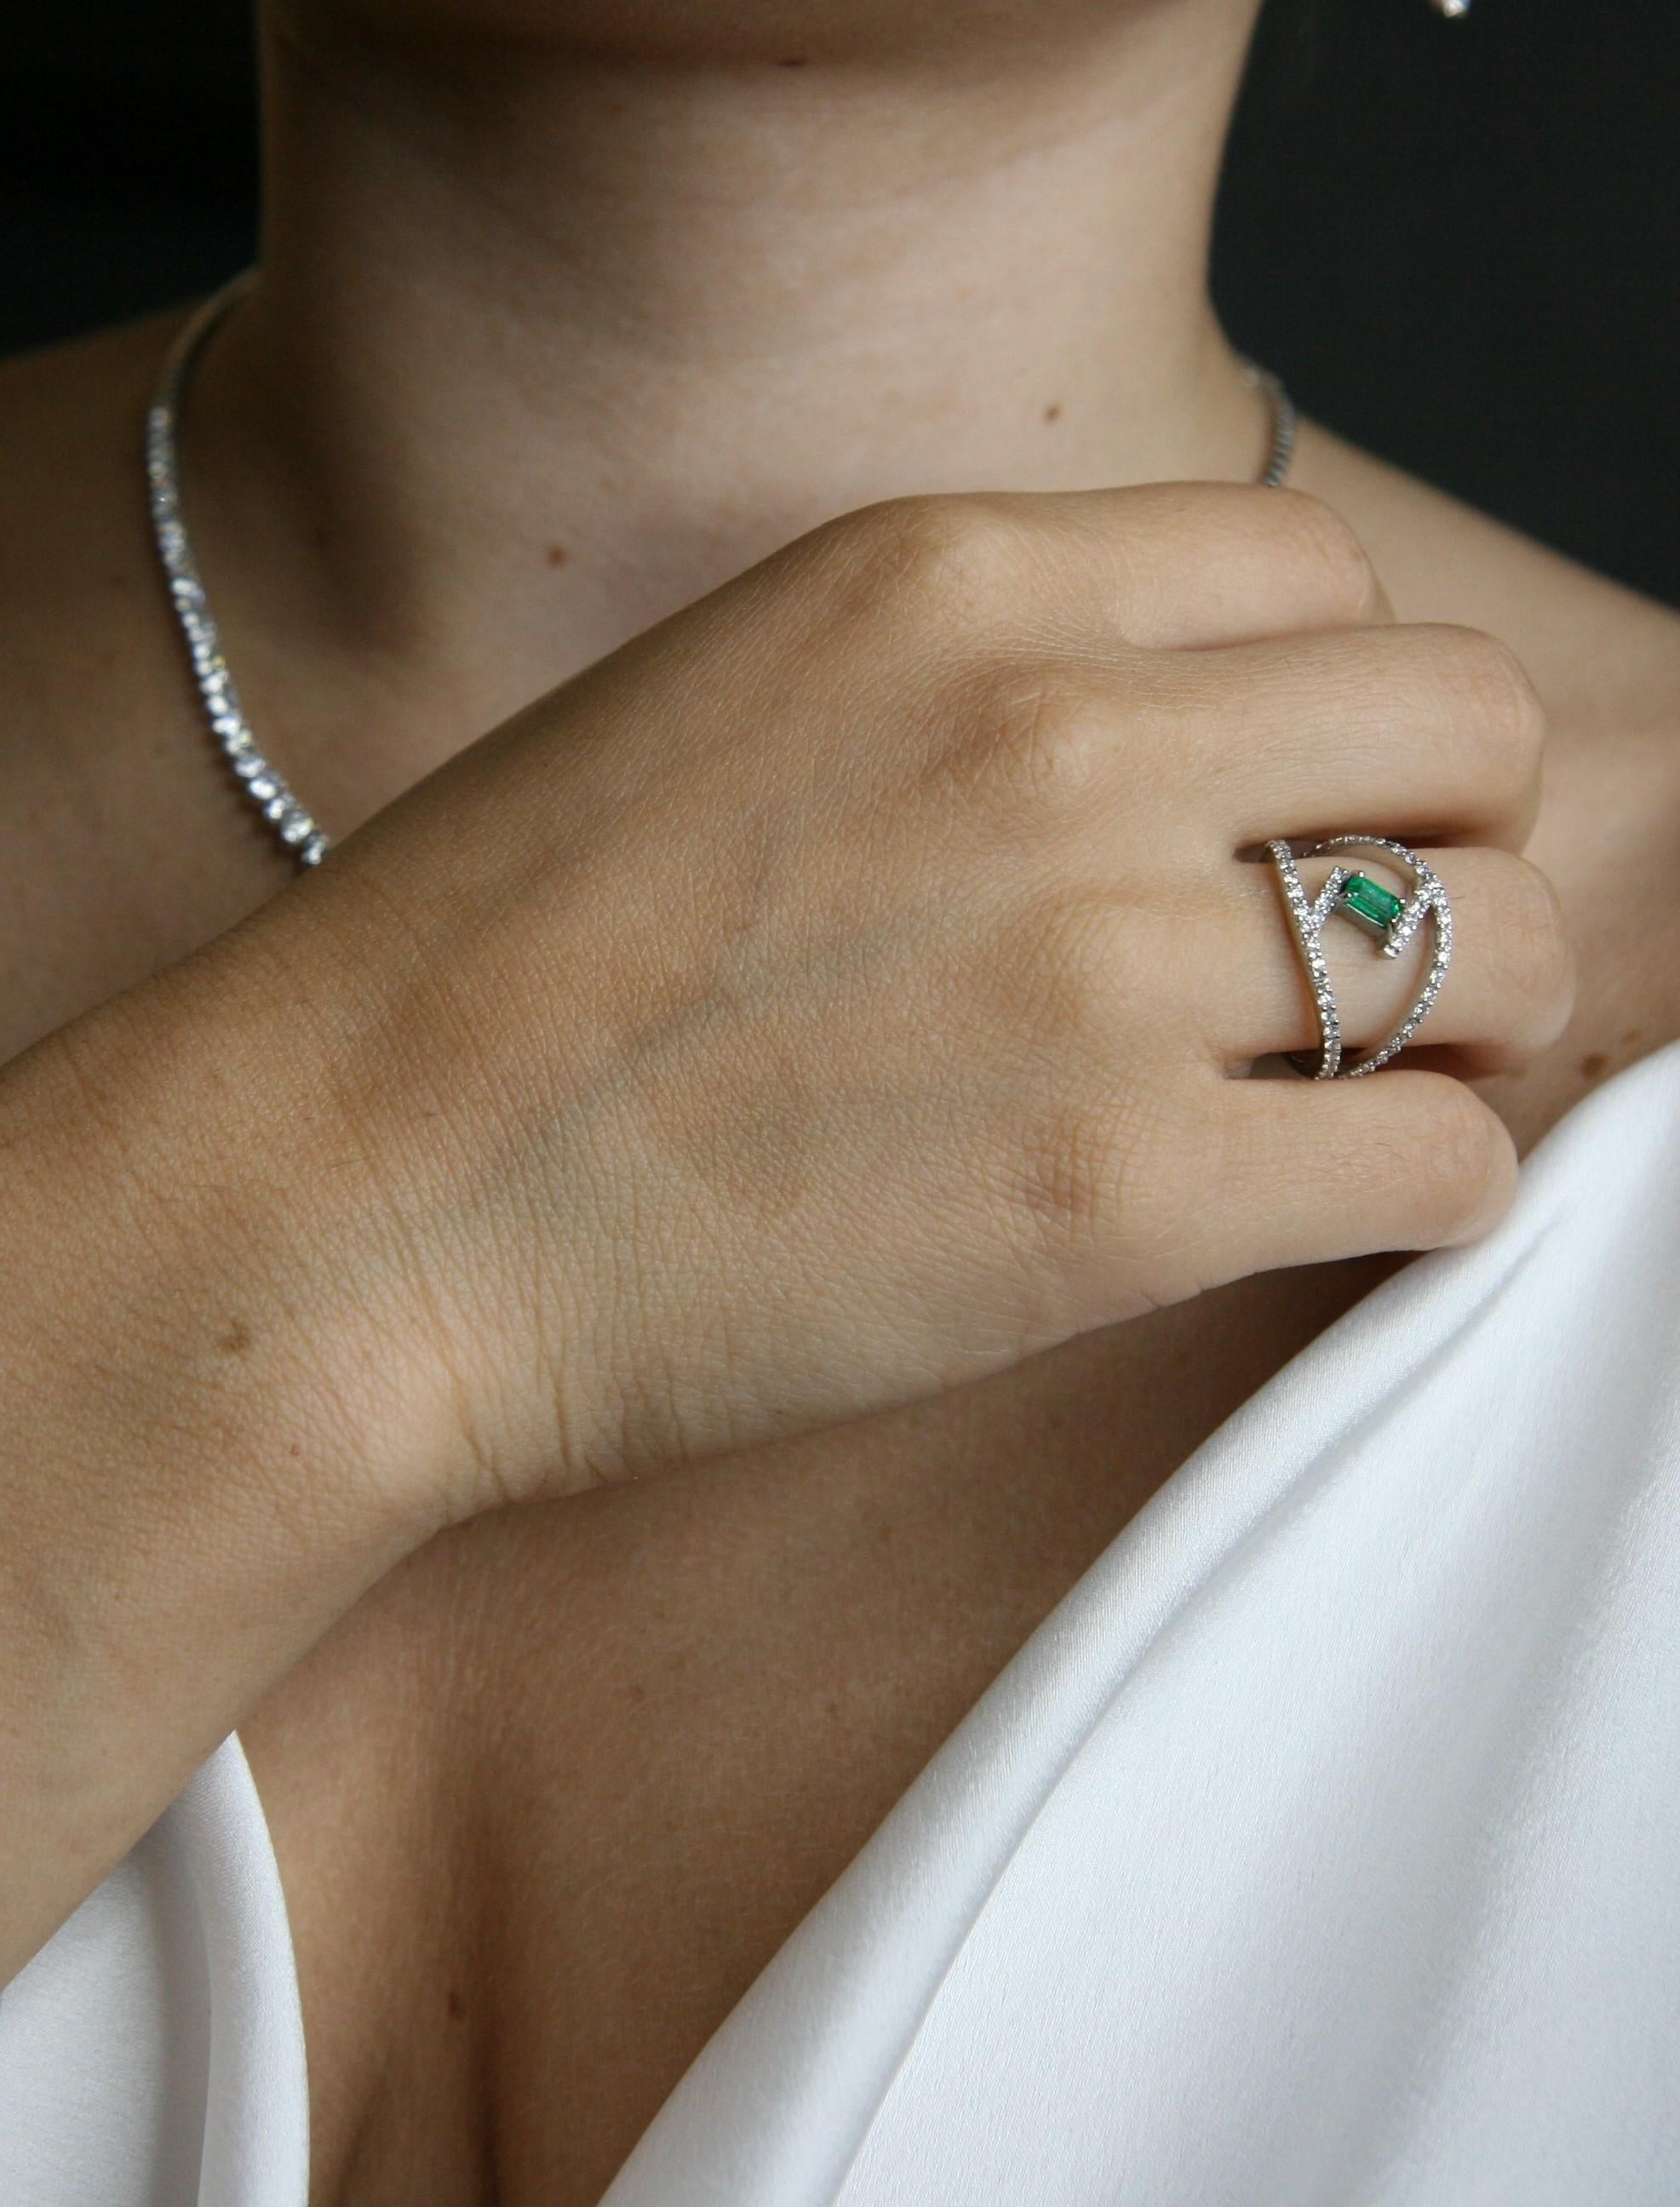 Contemporary Diamond and Emerald Ring in Withe Gold 0.64 Carat Diamonds 0.3 Carat Emerald